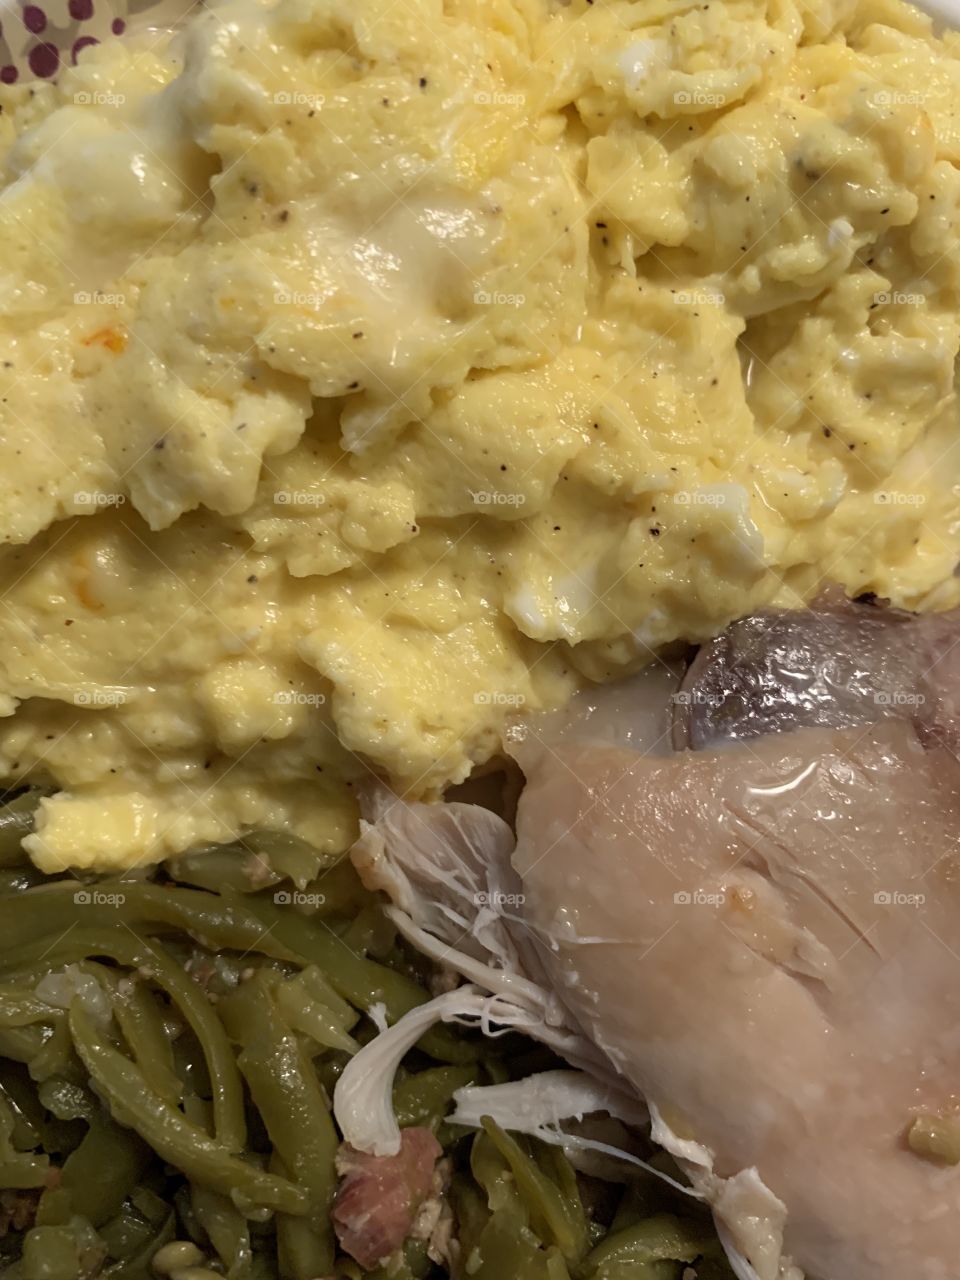 JPTSNW; Only What I’m Good At! Food, Muenster Cheesy Egg Breakfast with French style cut green beans and rotisserie skinless chicken thigh. 2 of ten